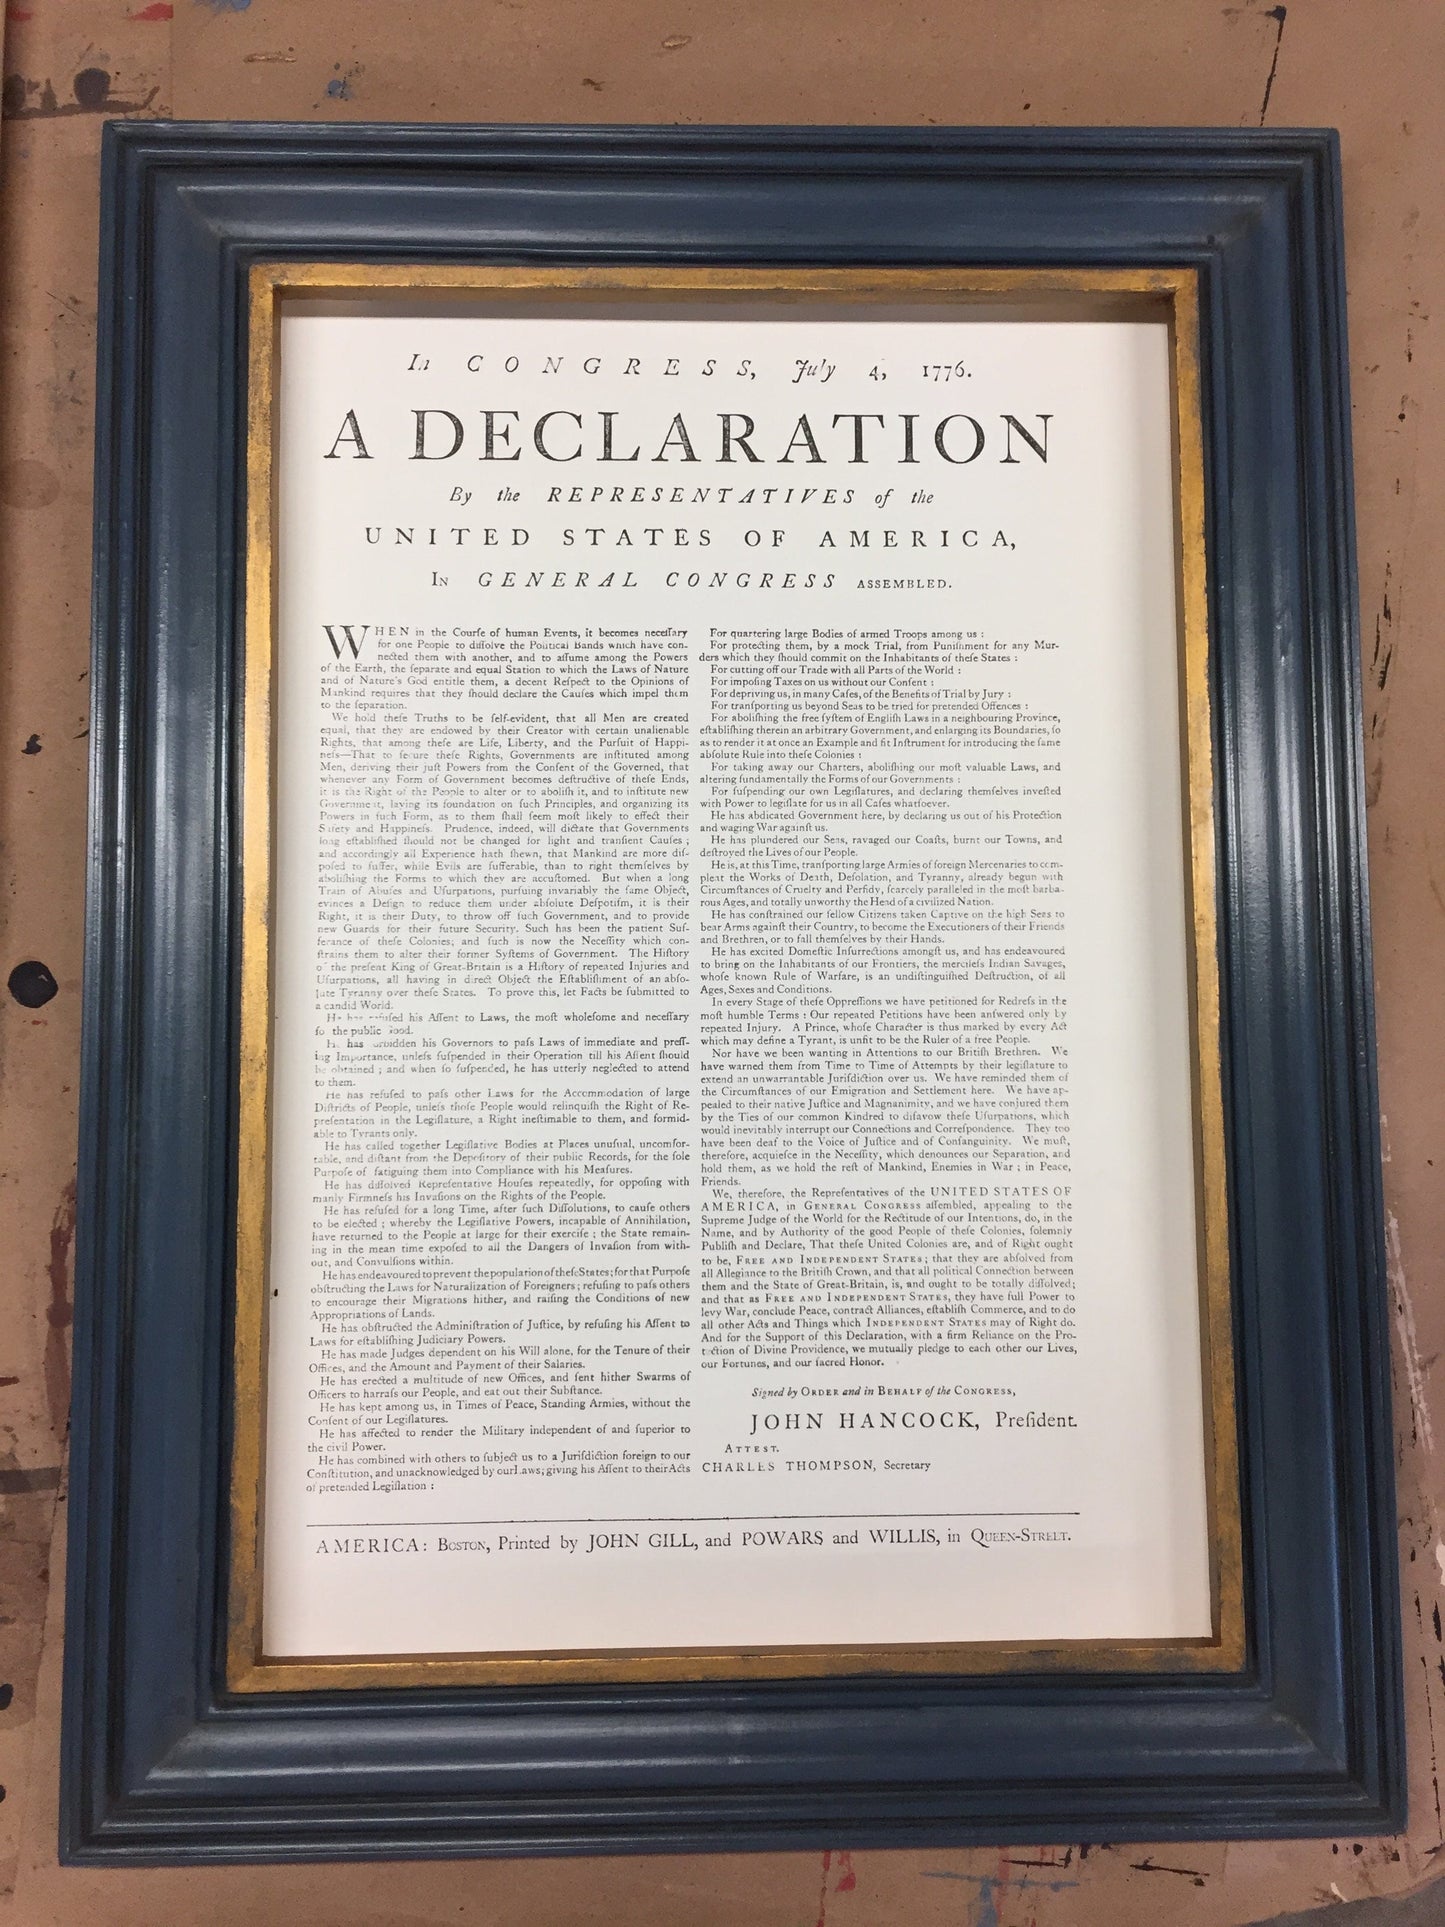 Edes "Declaration of Independence" from the Printing Office of Edes & Gill in Boston